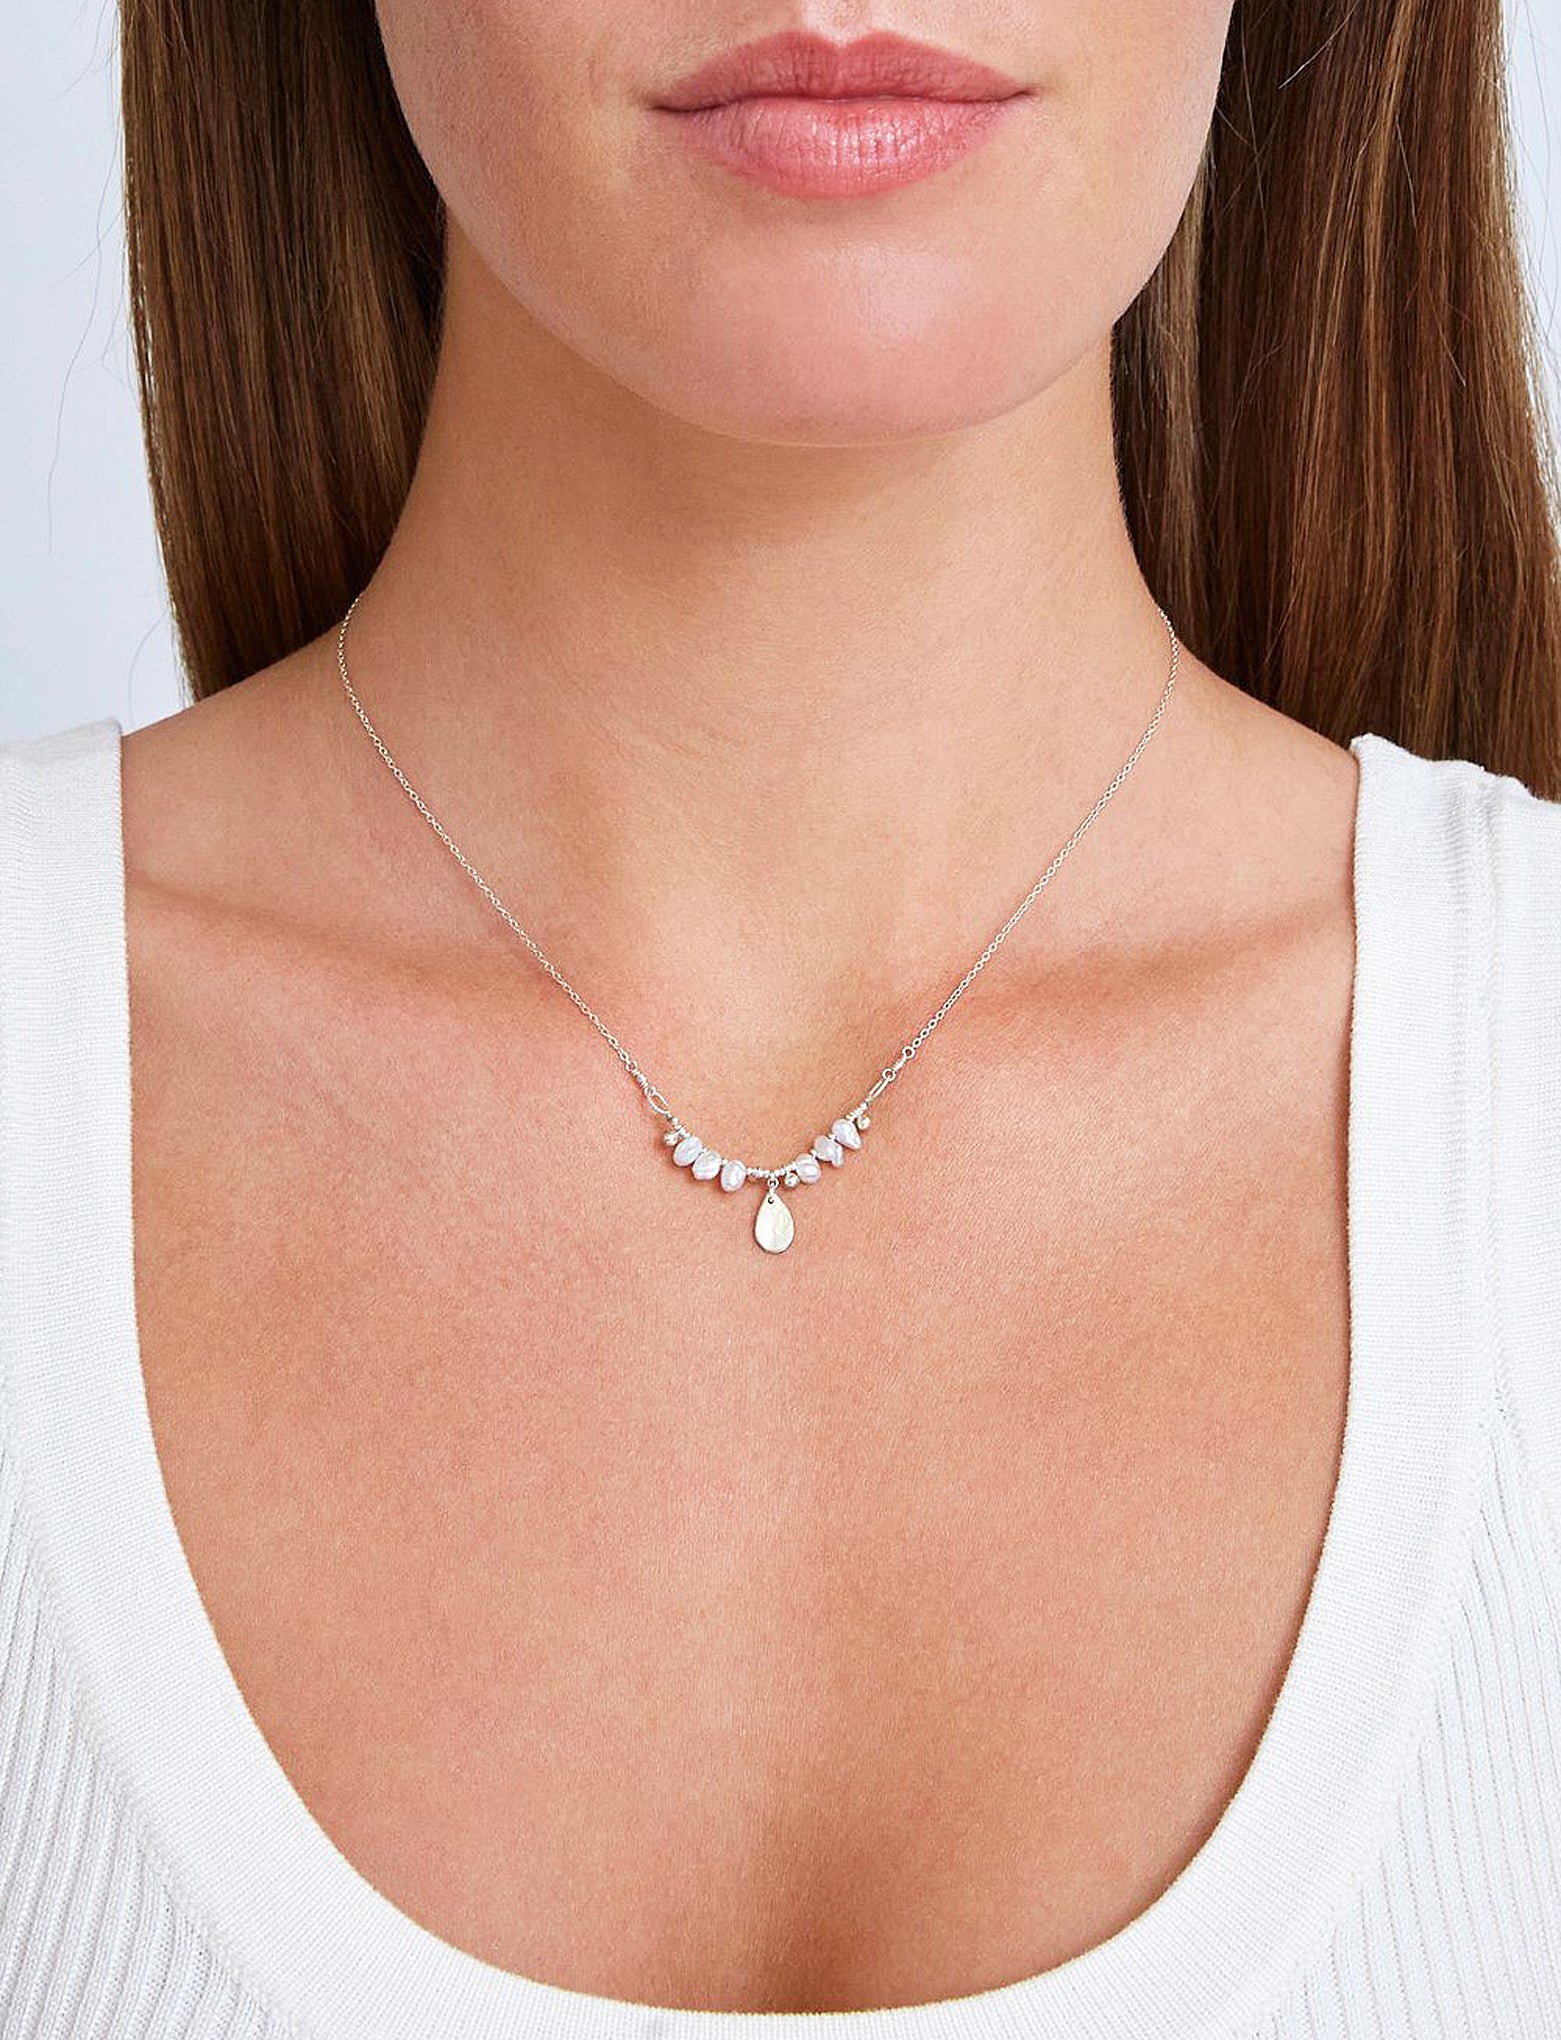 Chan Luu Tiara Pearl Pendant Necklace in Light Grey Pearl and Silver